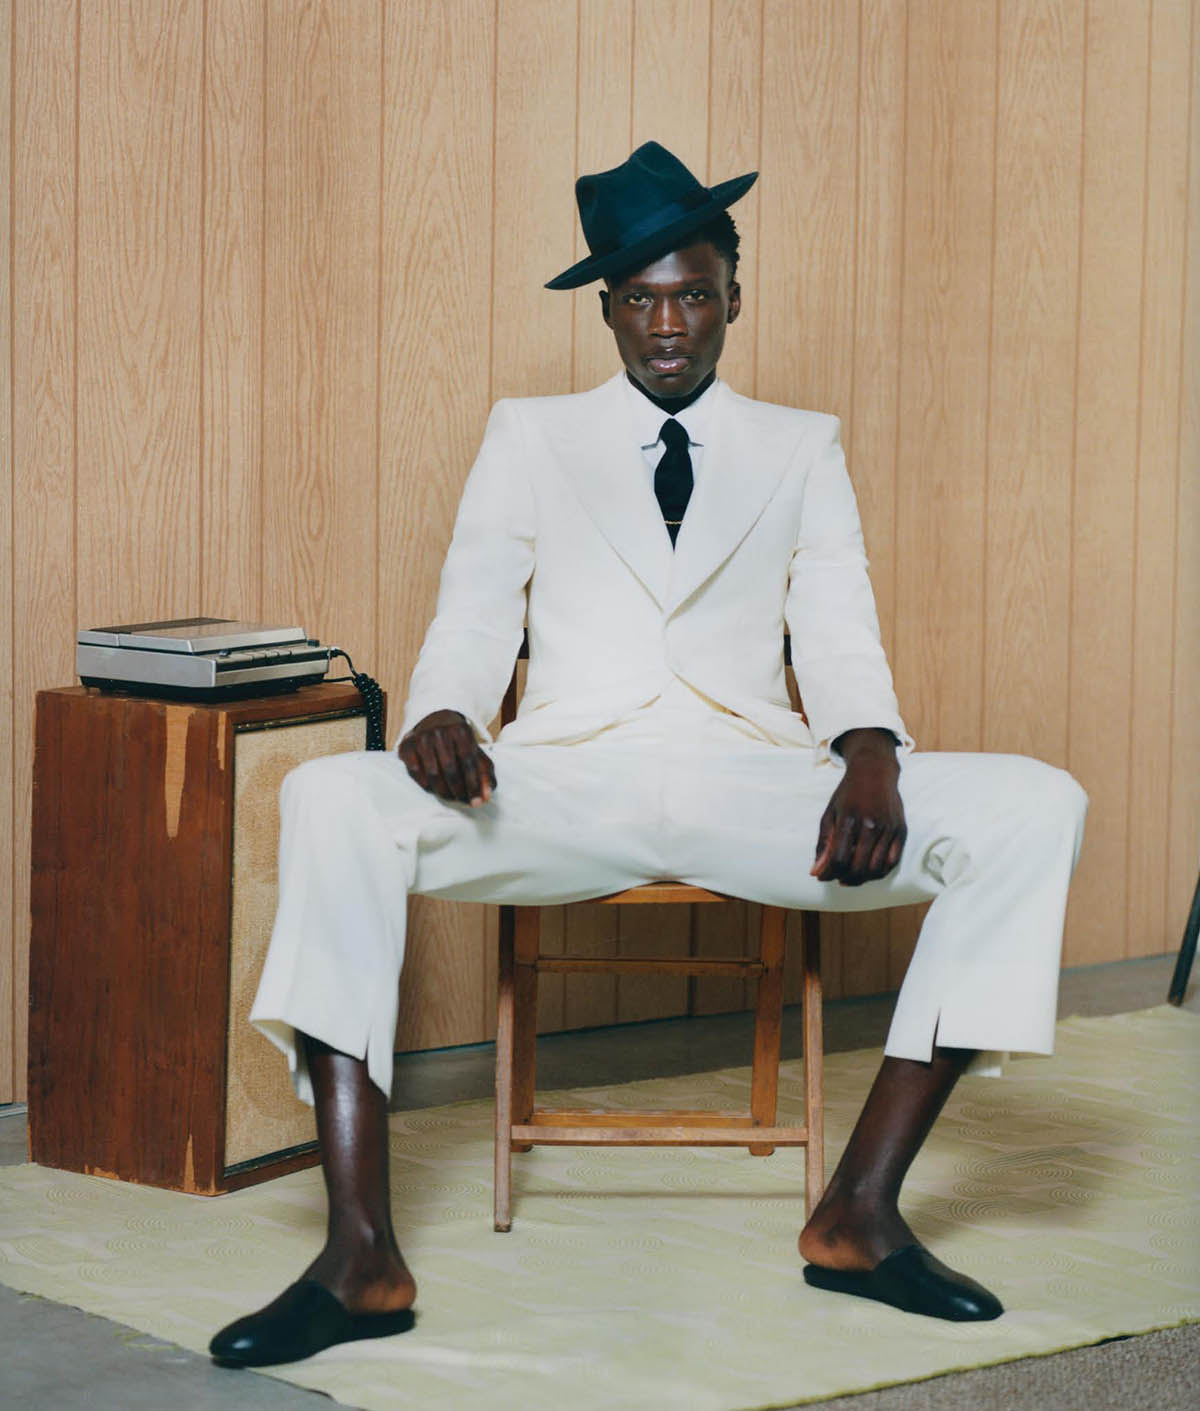 Cheikh Tall and Cloud Modi by Philip-Daniel Ducasse for WSJ. Magazine Spring 2021 Men’s Style